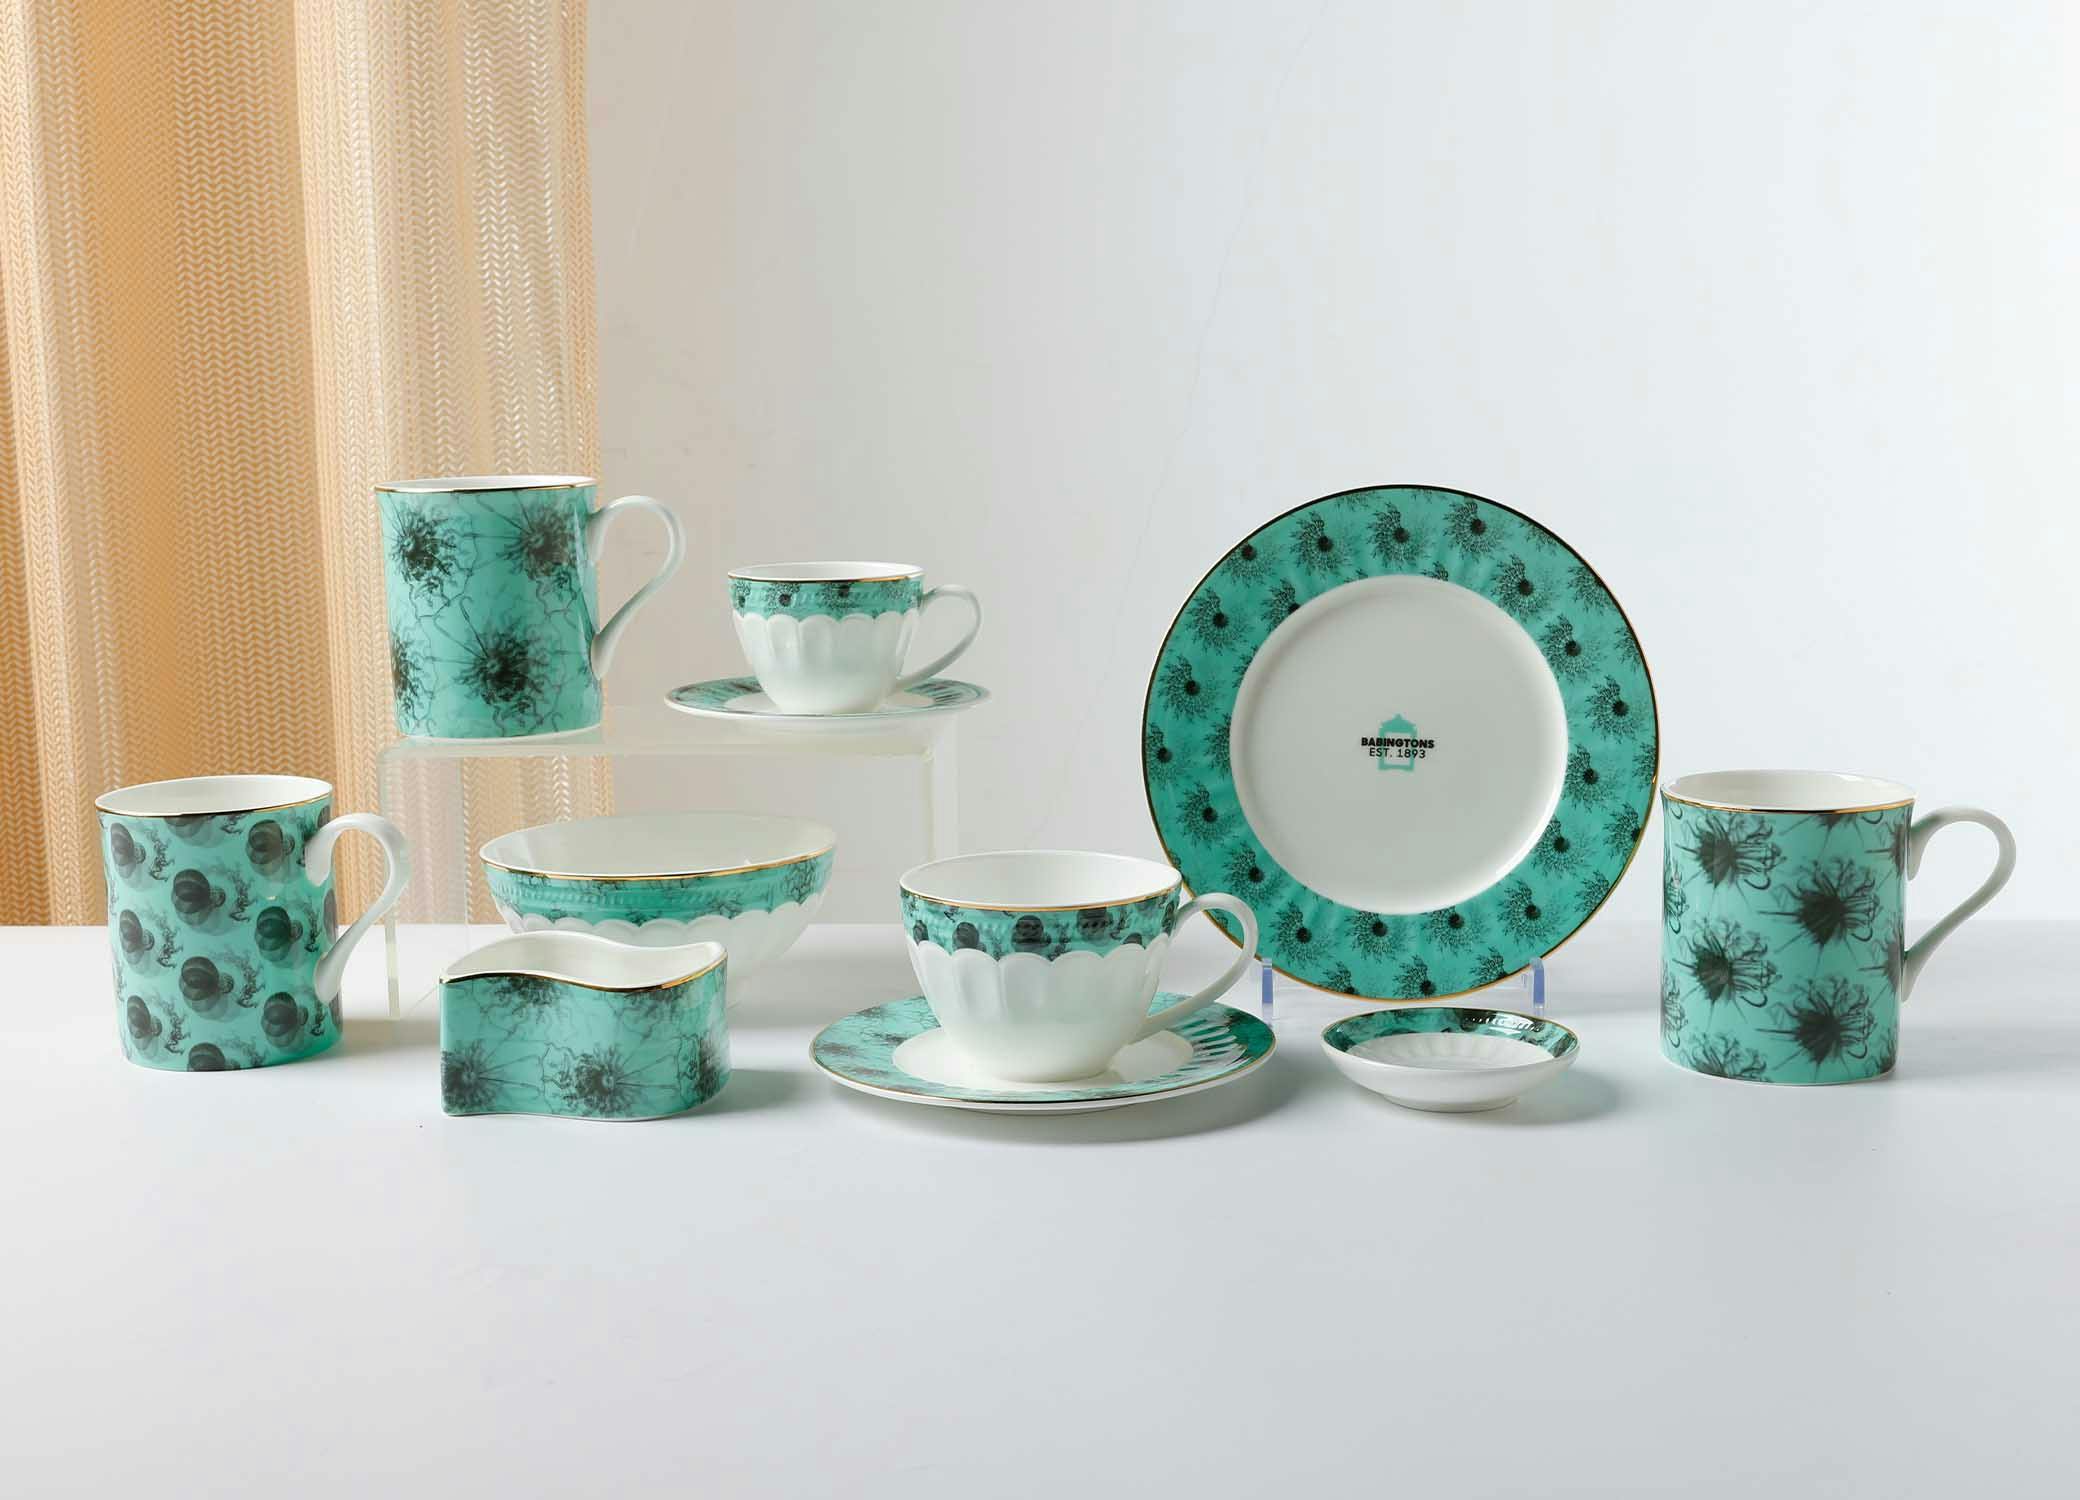 Set of procelains made for Babingtons. All the procelains have the new branding. The set is composed of three tea cups, three big coffee cups and one plate